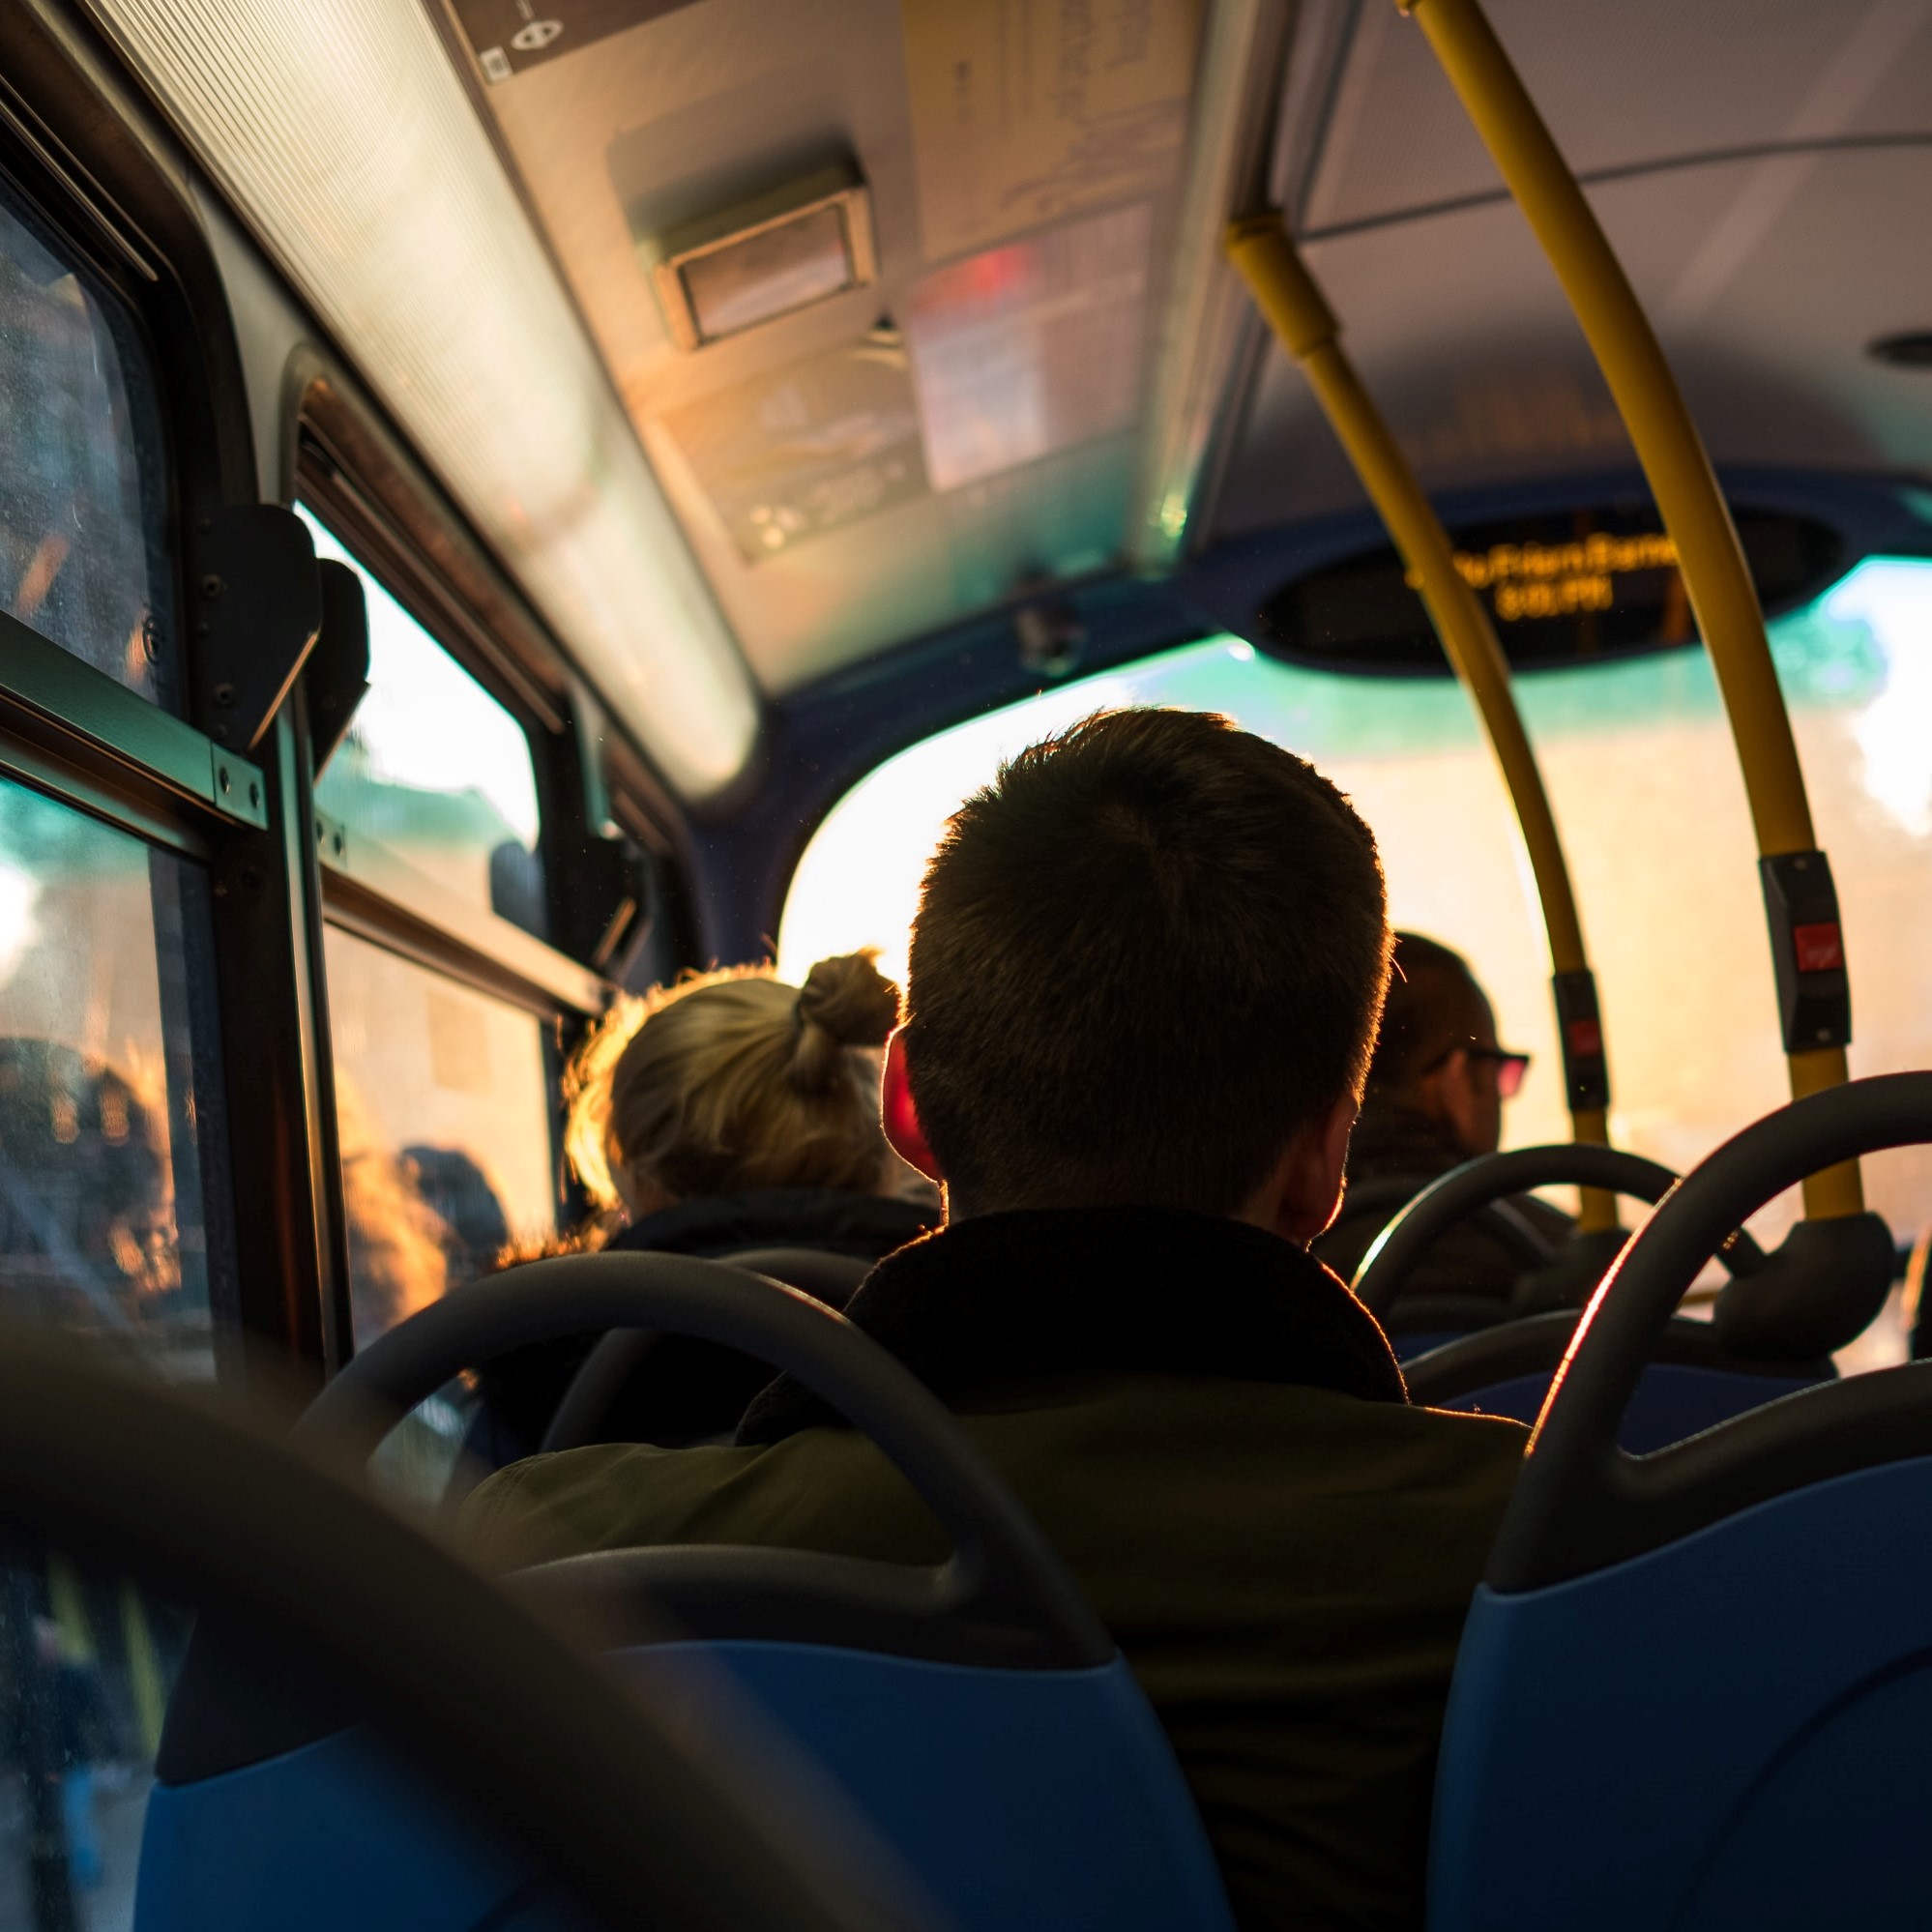 A photo on a bus, with a person's head in the foreground as people are sitting on the bus seats.